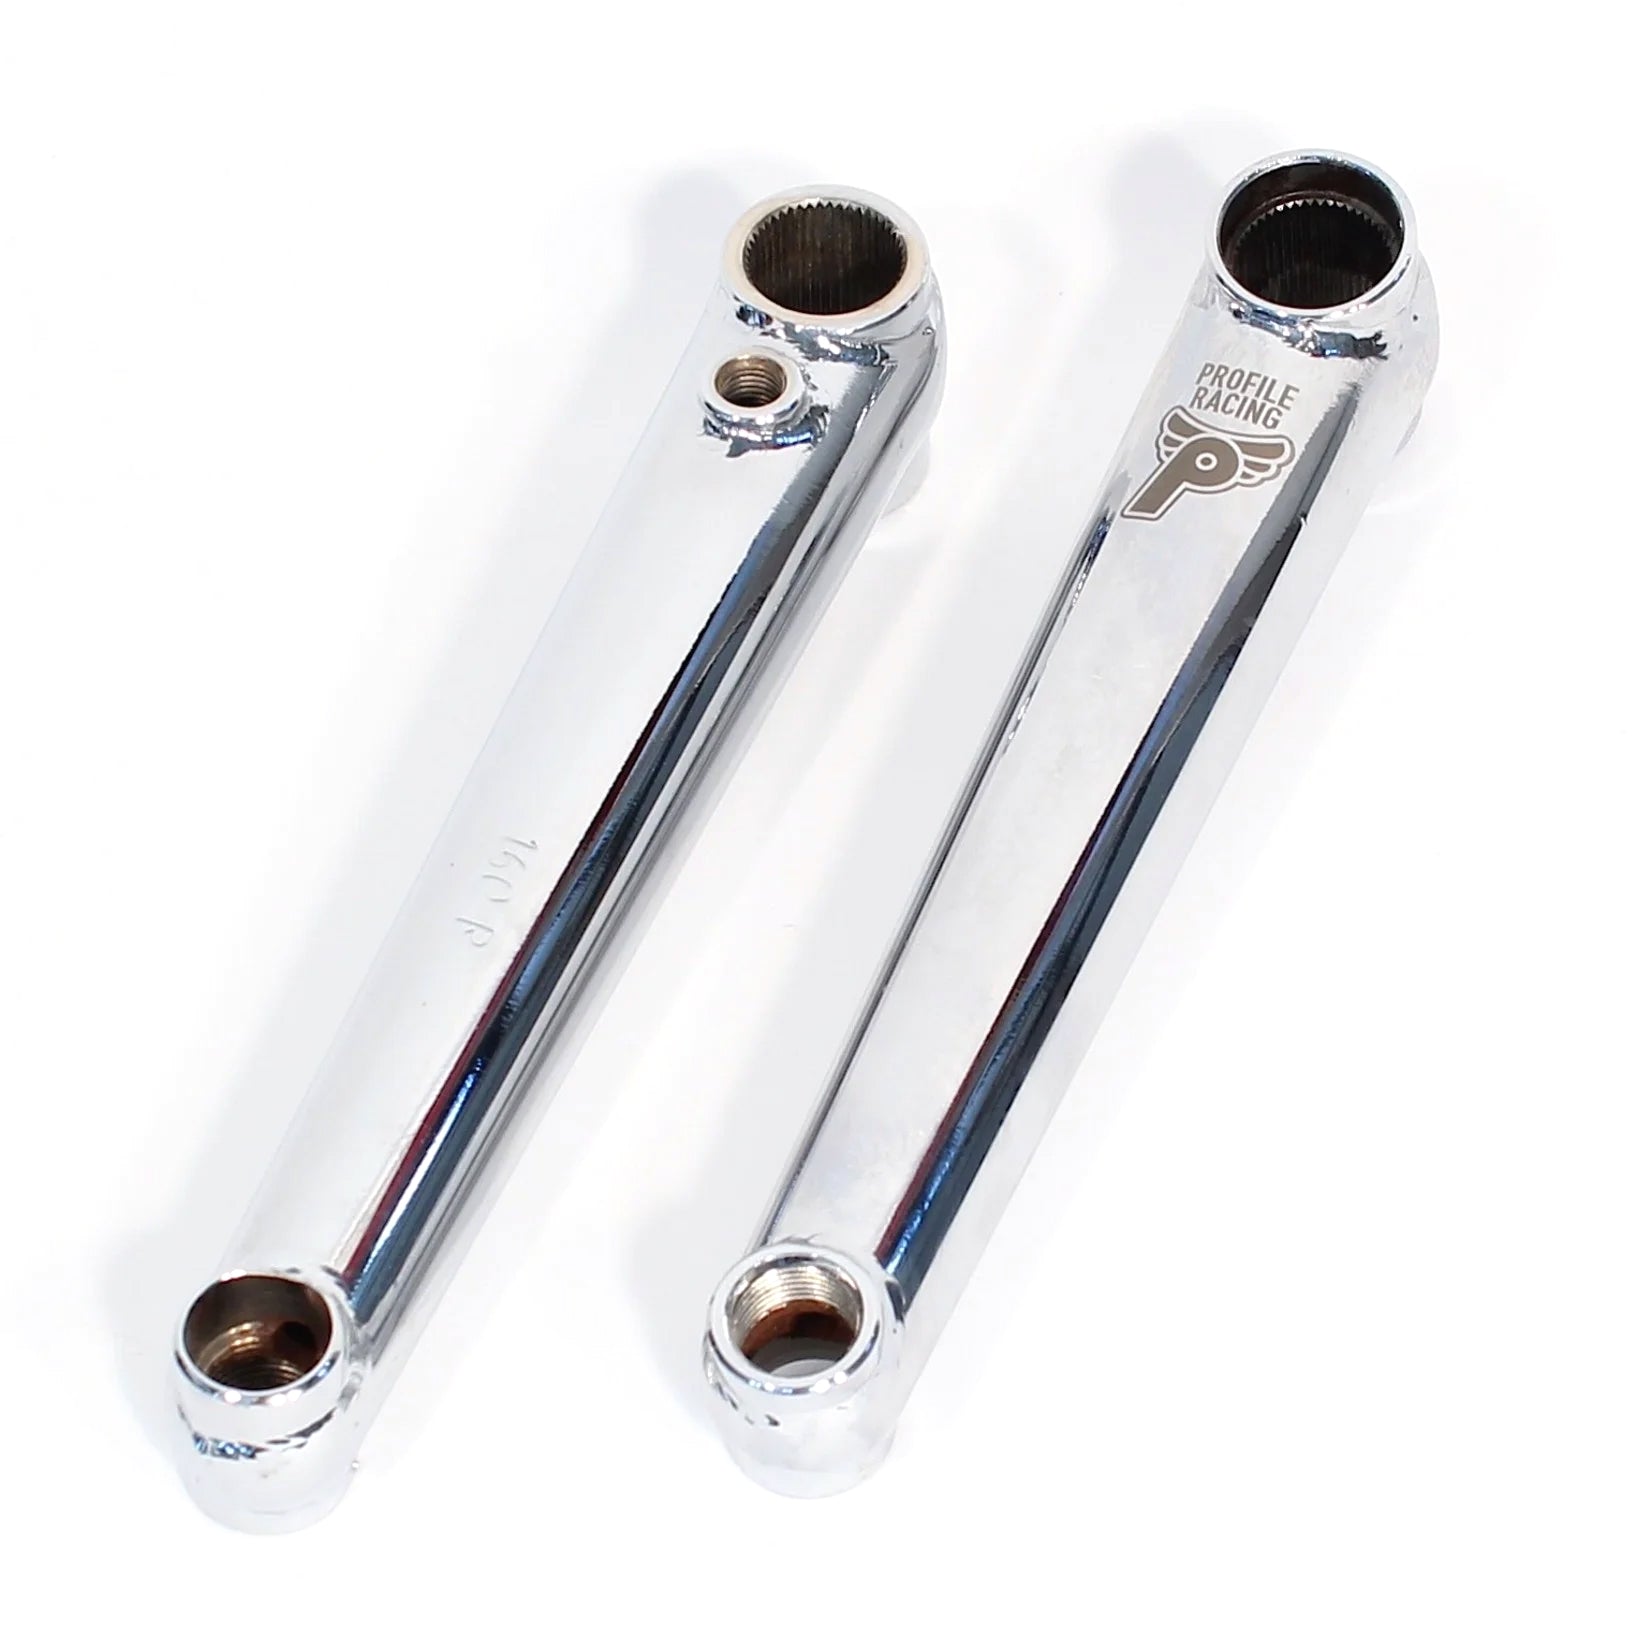 Two chrome-finished Profile Race Cranks, one labeled with metric sizes and the other with imperial sizes, featuring a 19mm 48 spline spindle detail, isolated on a white background.